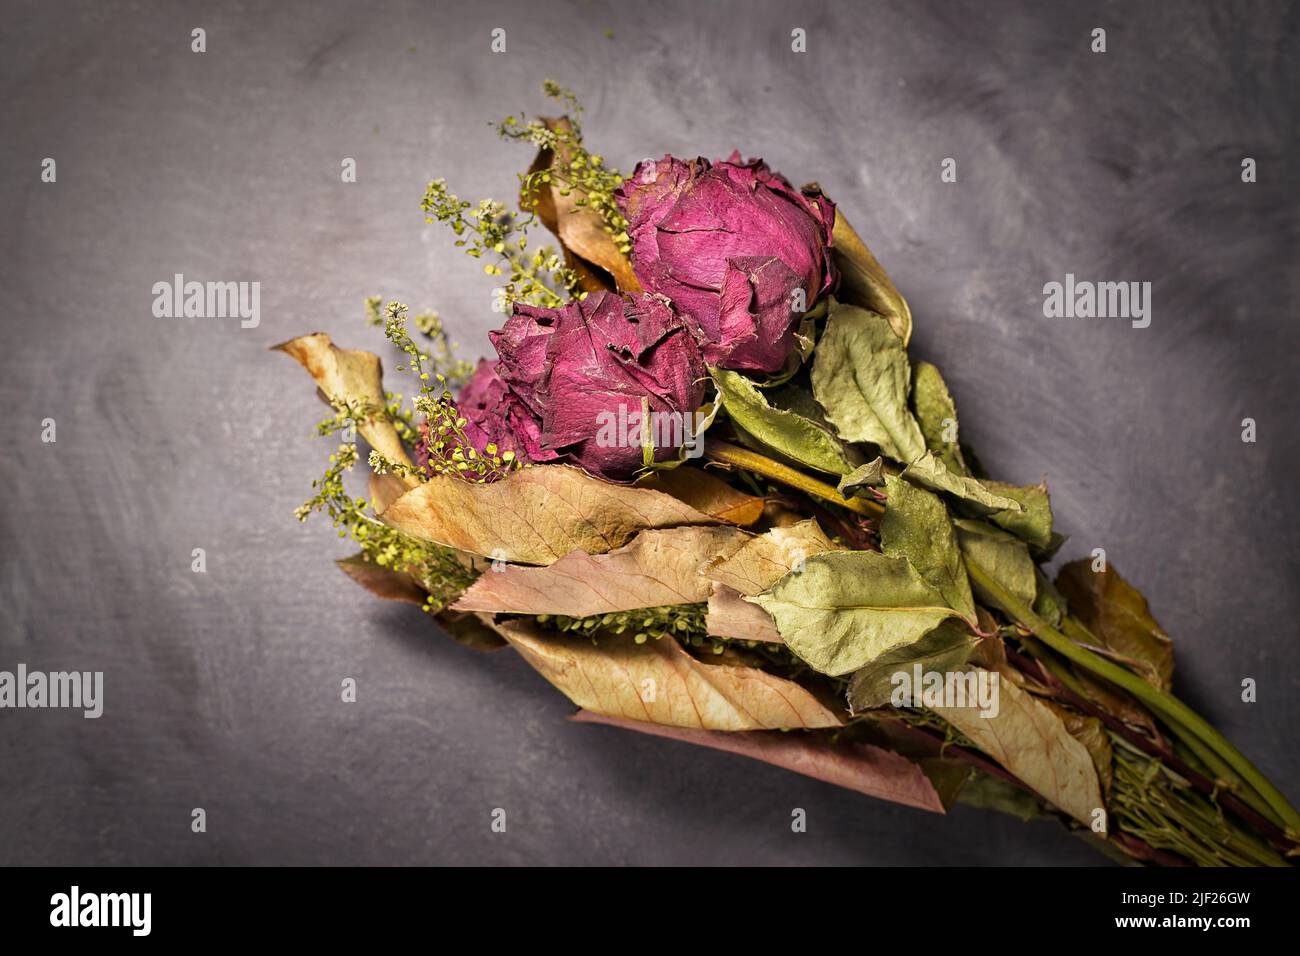 A studio photo of a bouquet of dried red roses on a table. Stock Photo